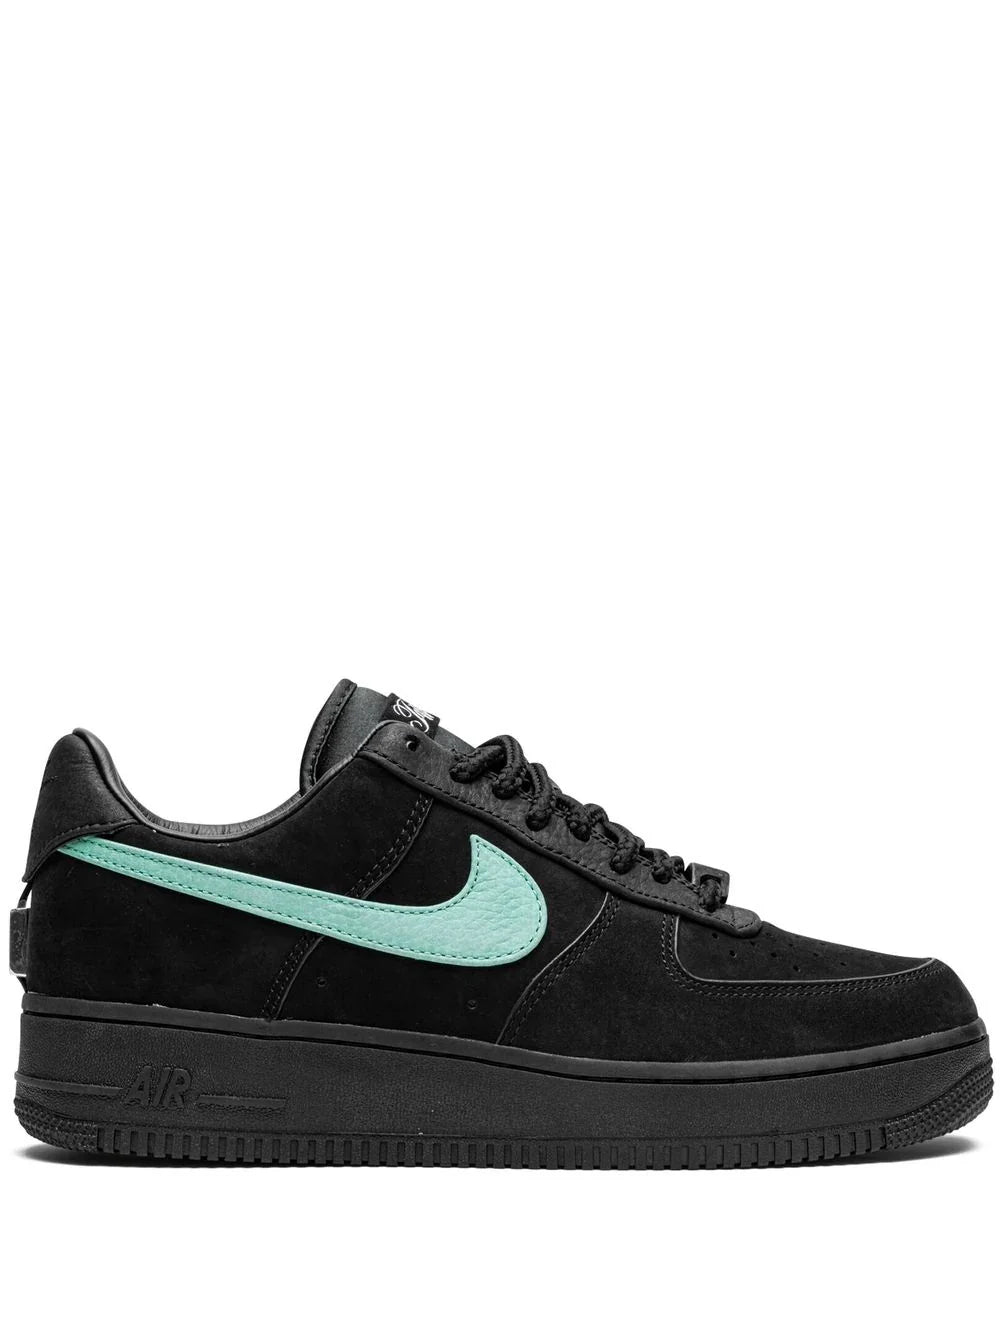 AIRFORCE 1 X TIFFANY & CO. LOW